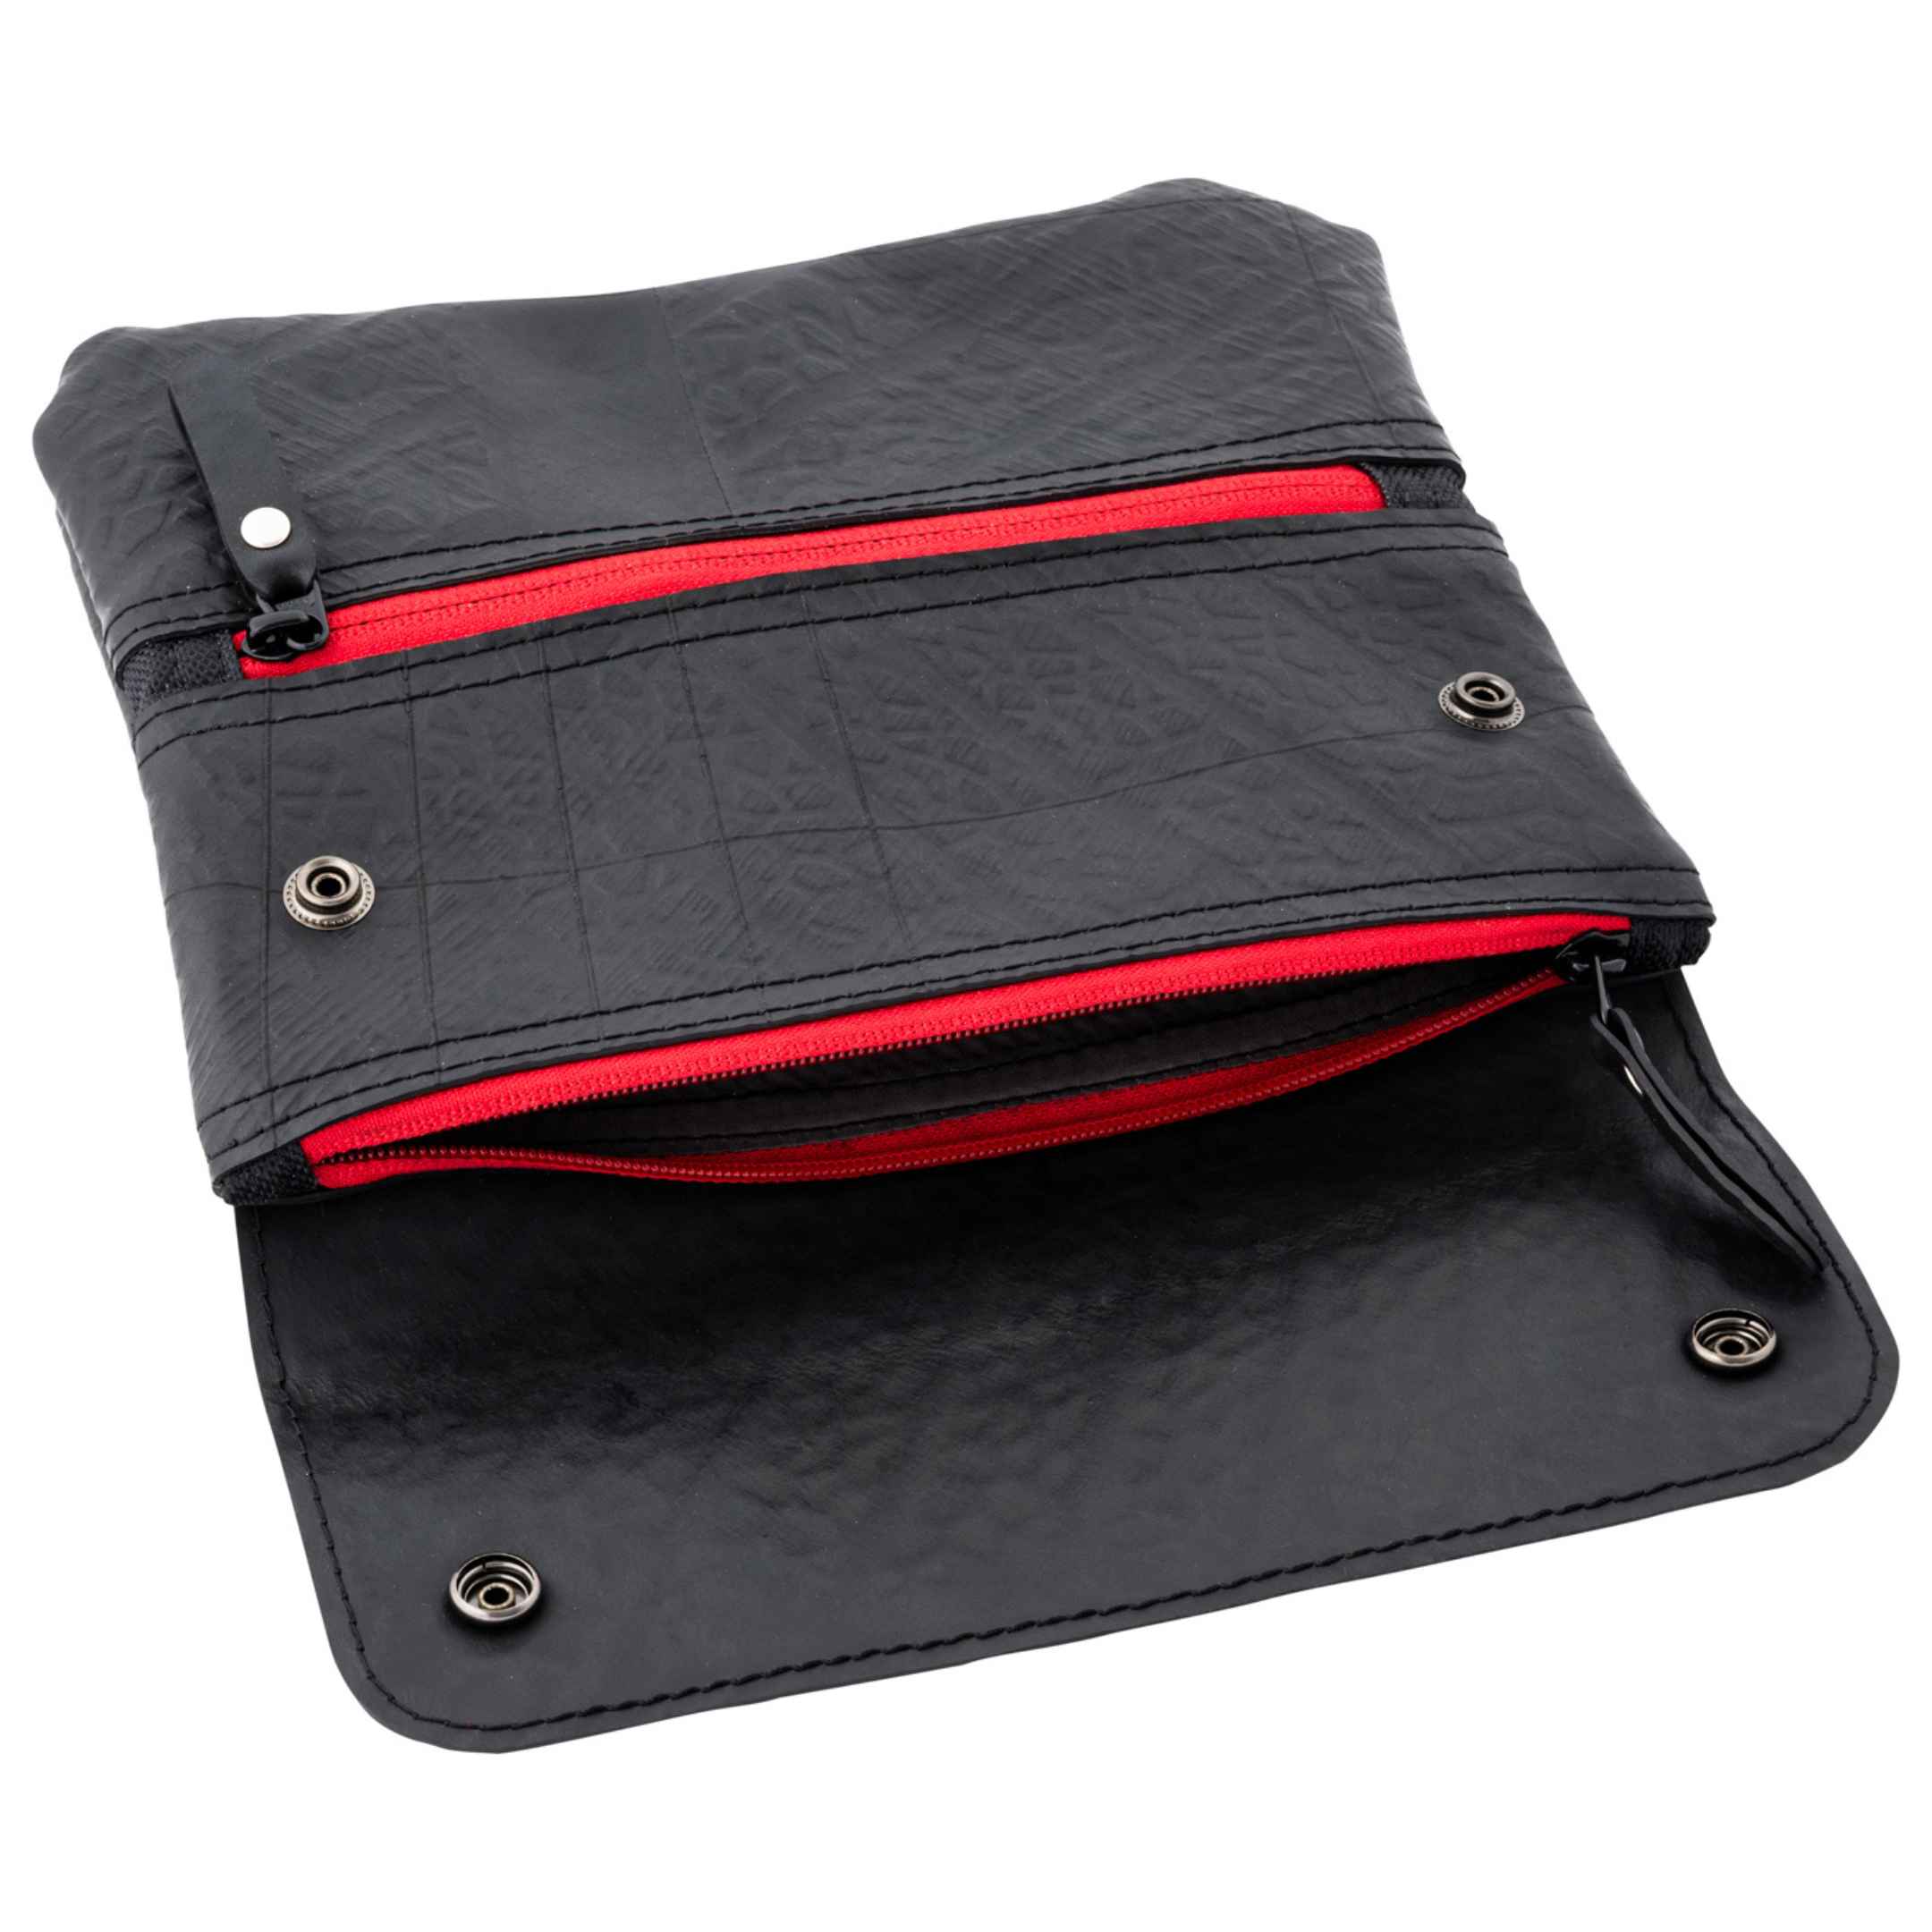 Parker Recycled Rubber Vegan Bag (3 Colours Available)